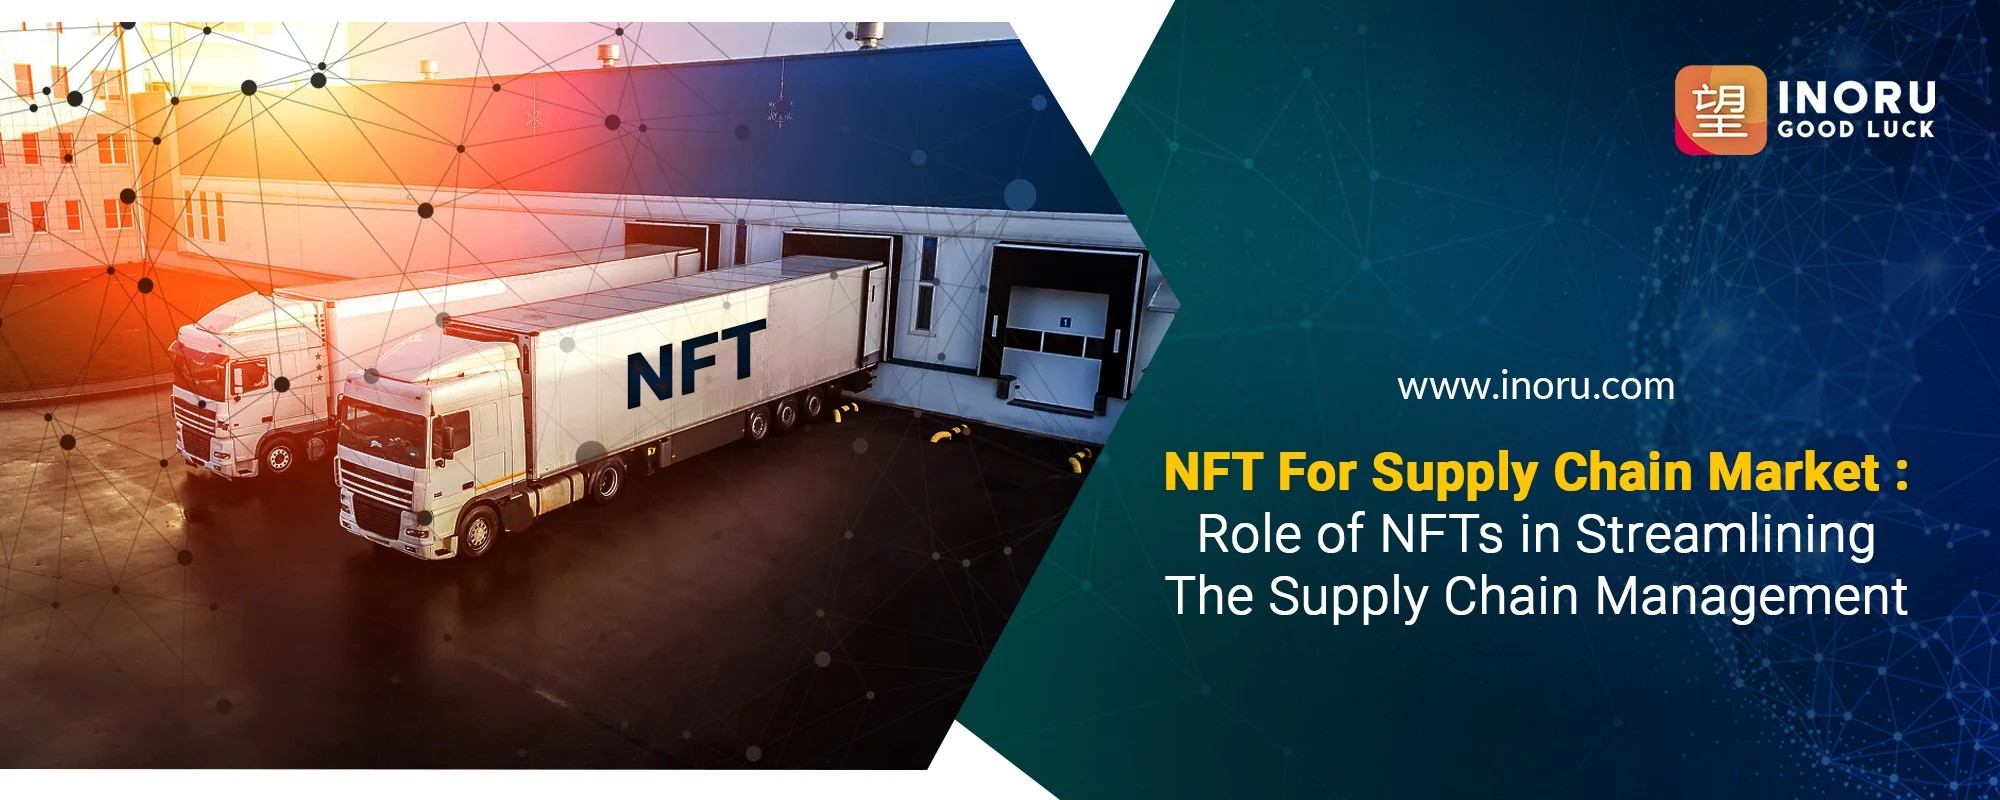 NFT For Supply Chain Market